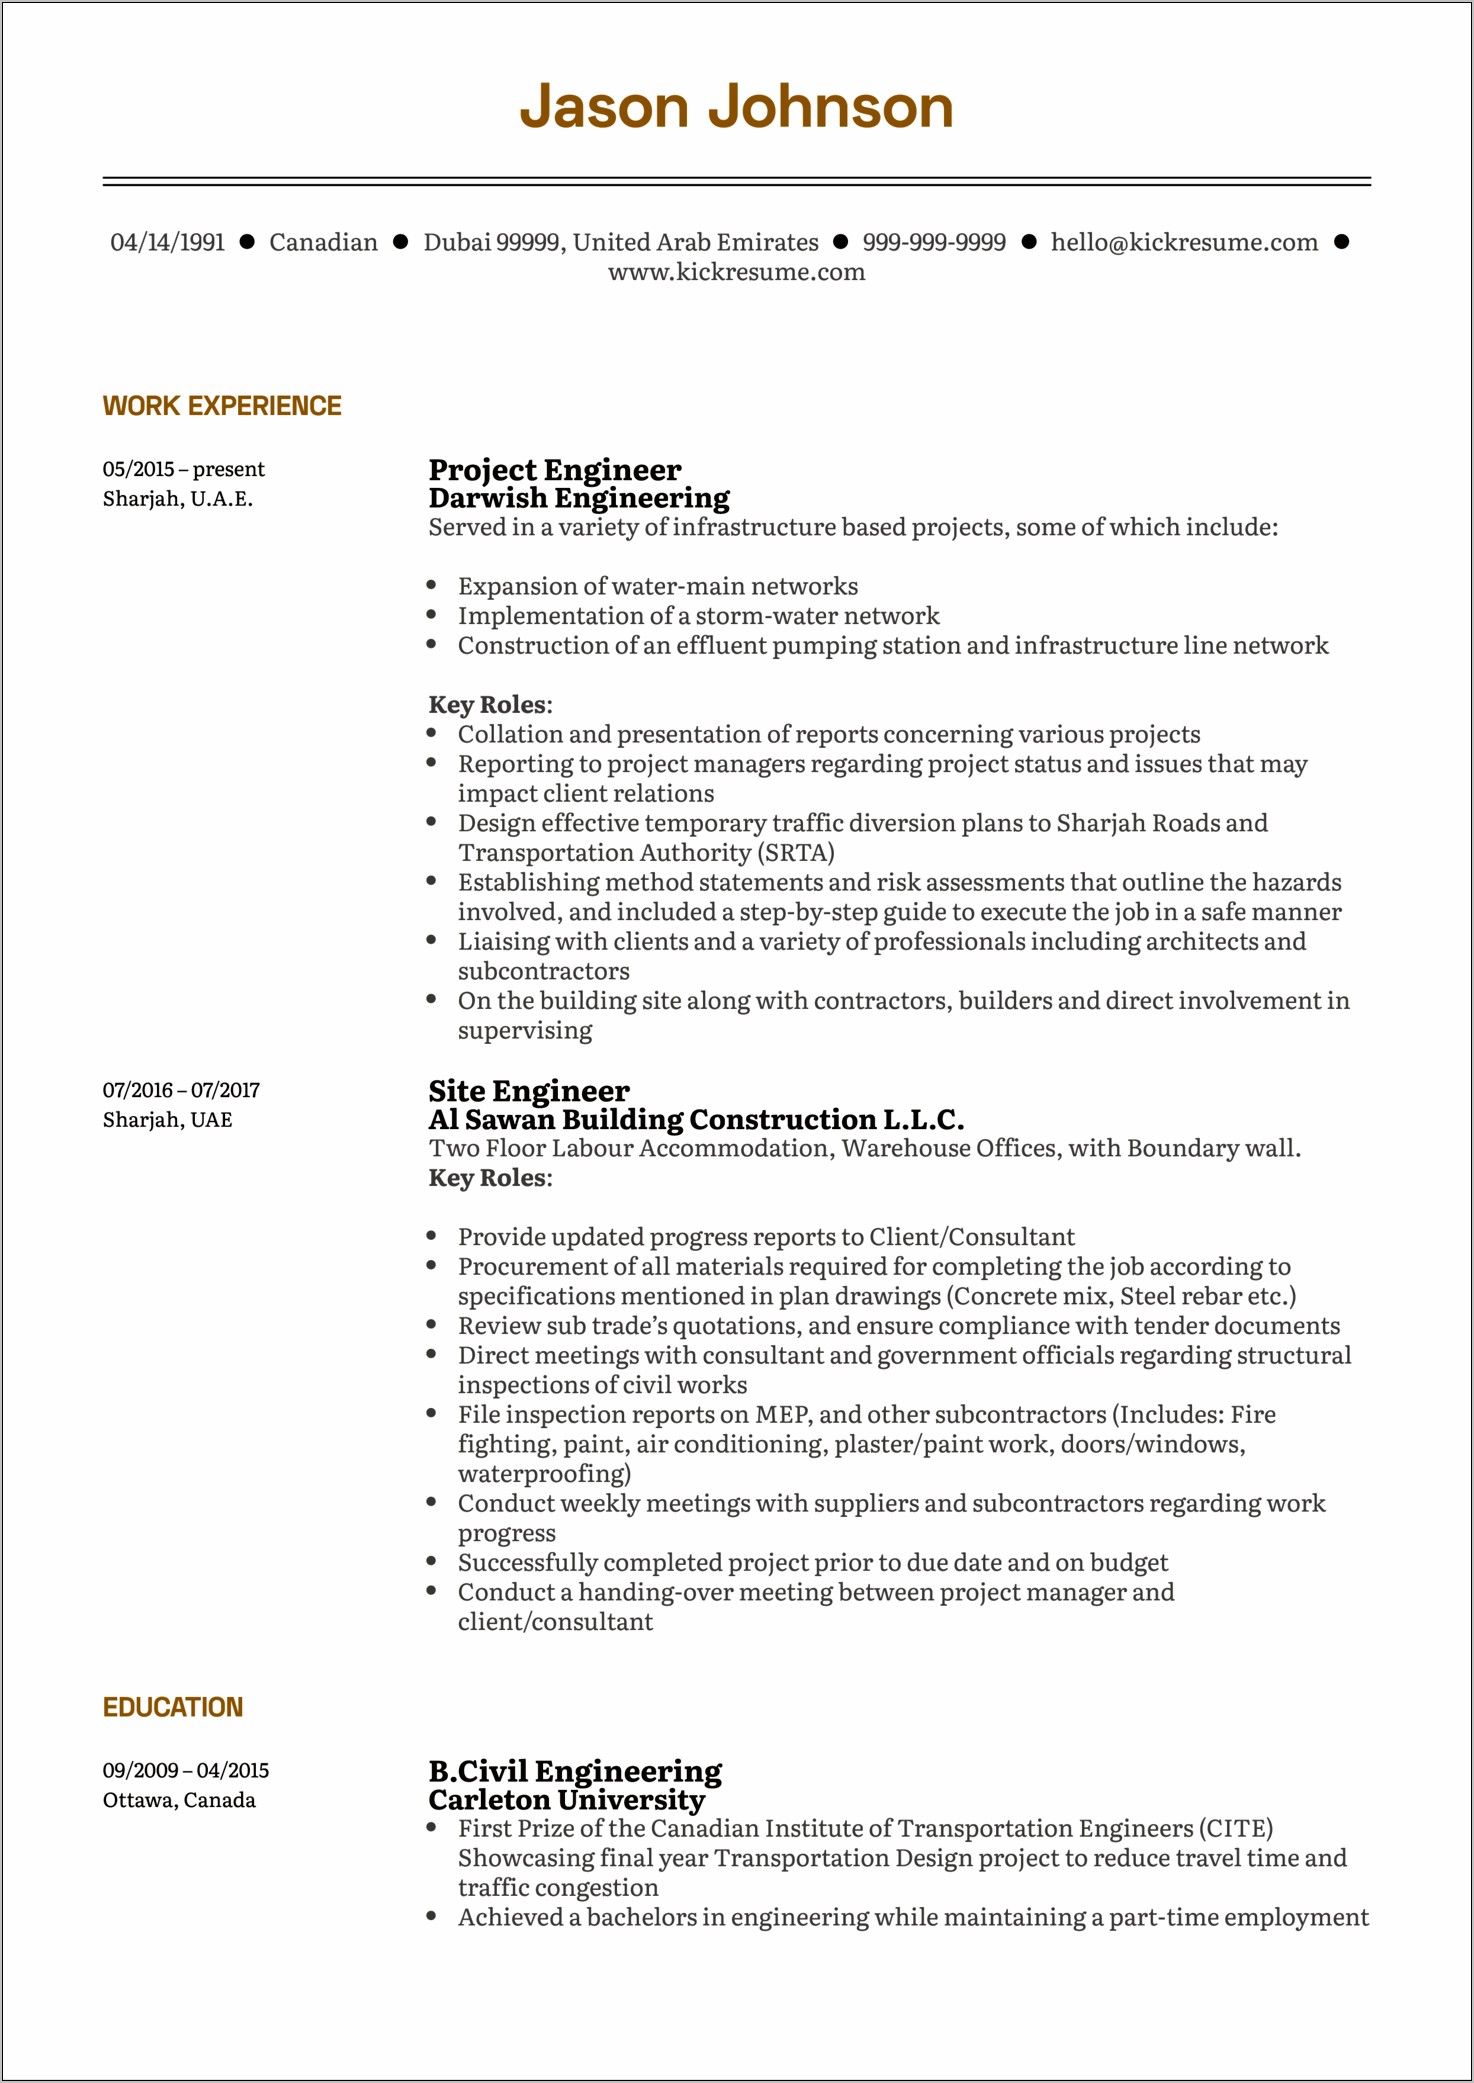 1 Year Experience Resume Sample For Mechanical Engineer